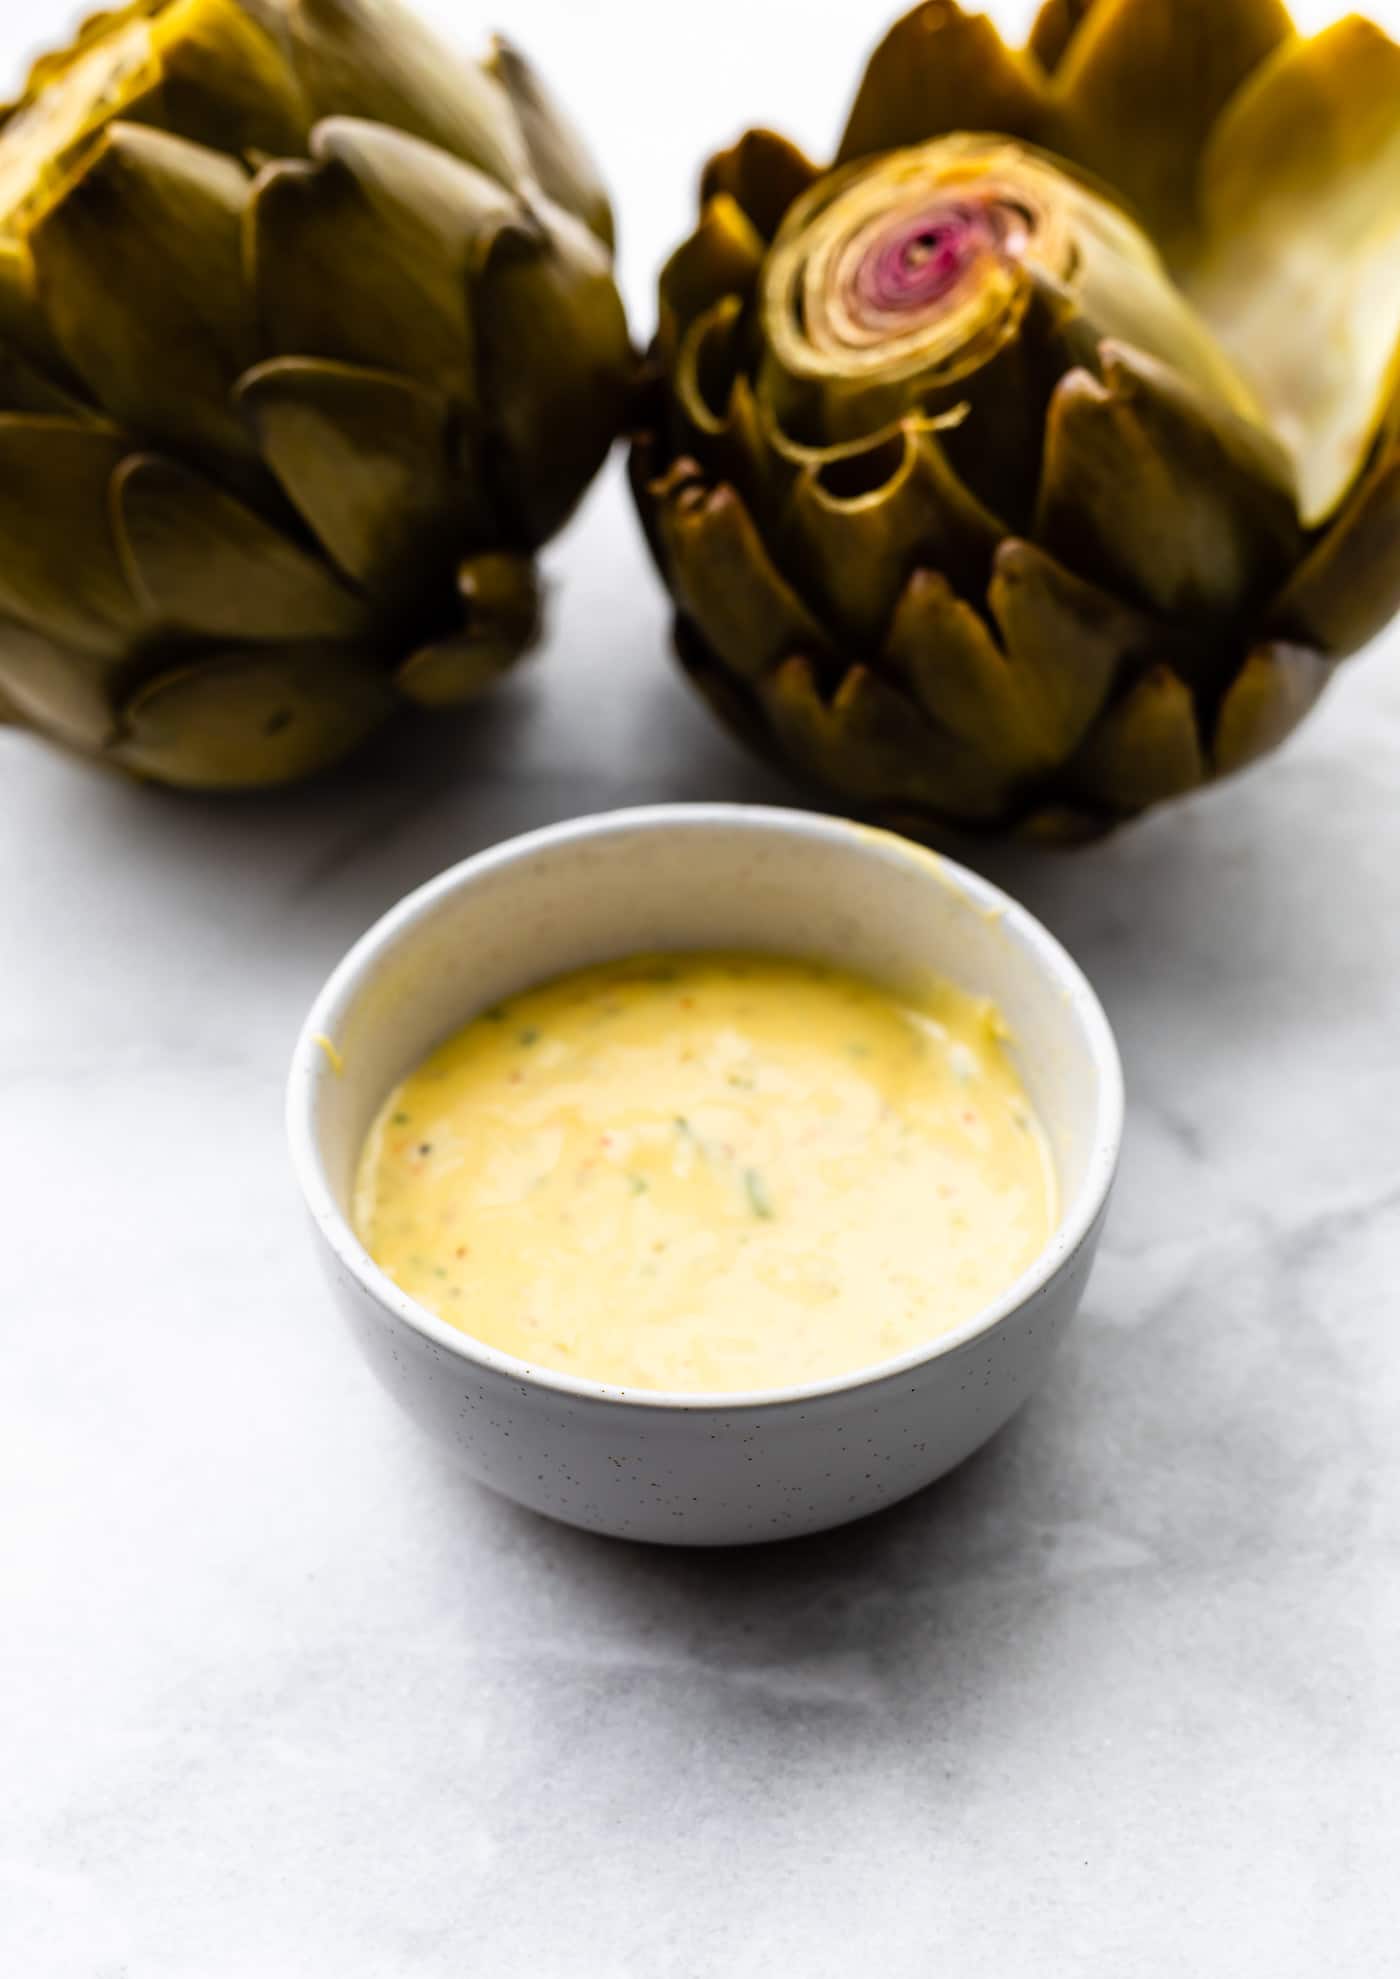 Two cooked artichokes next to a bowl of garlic aioli.